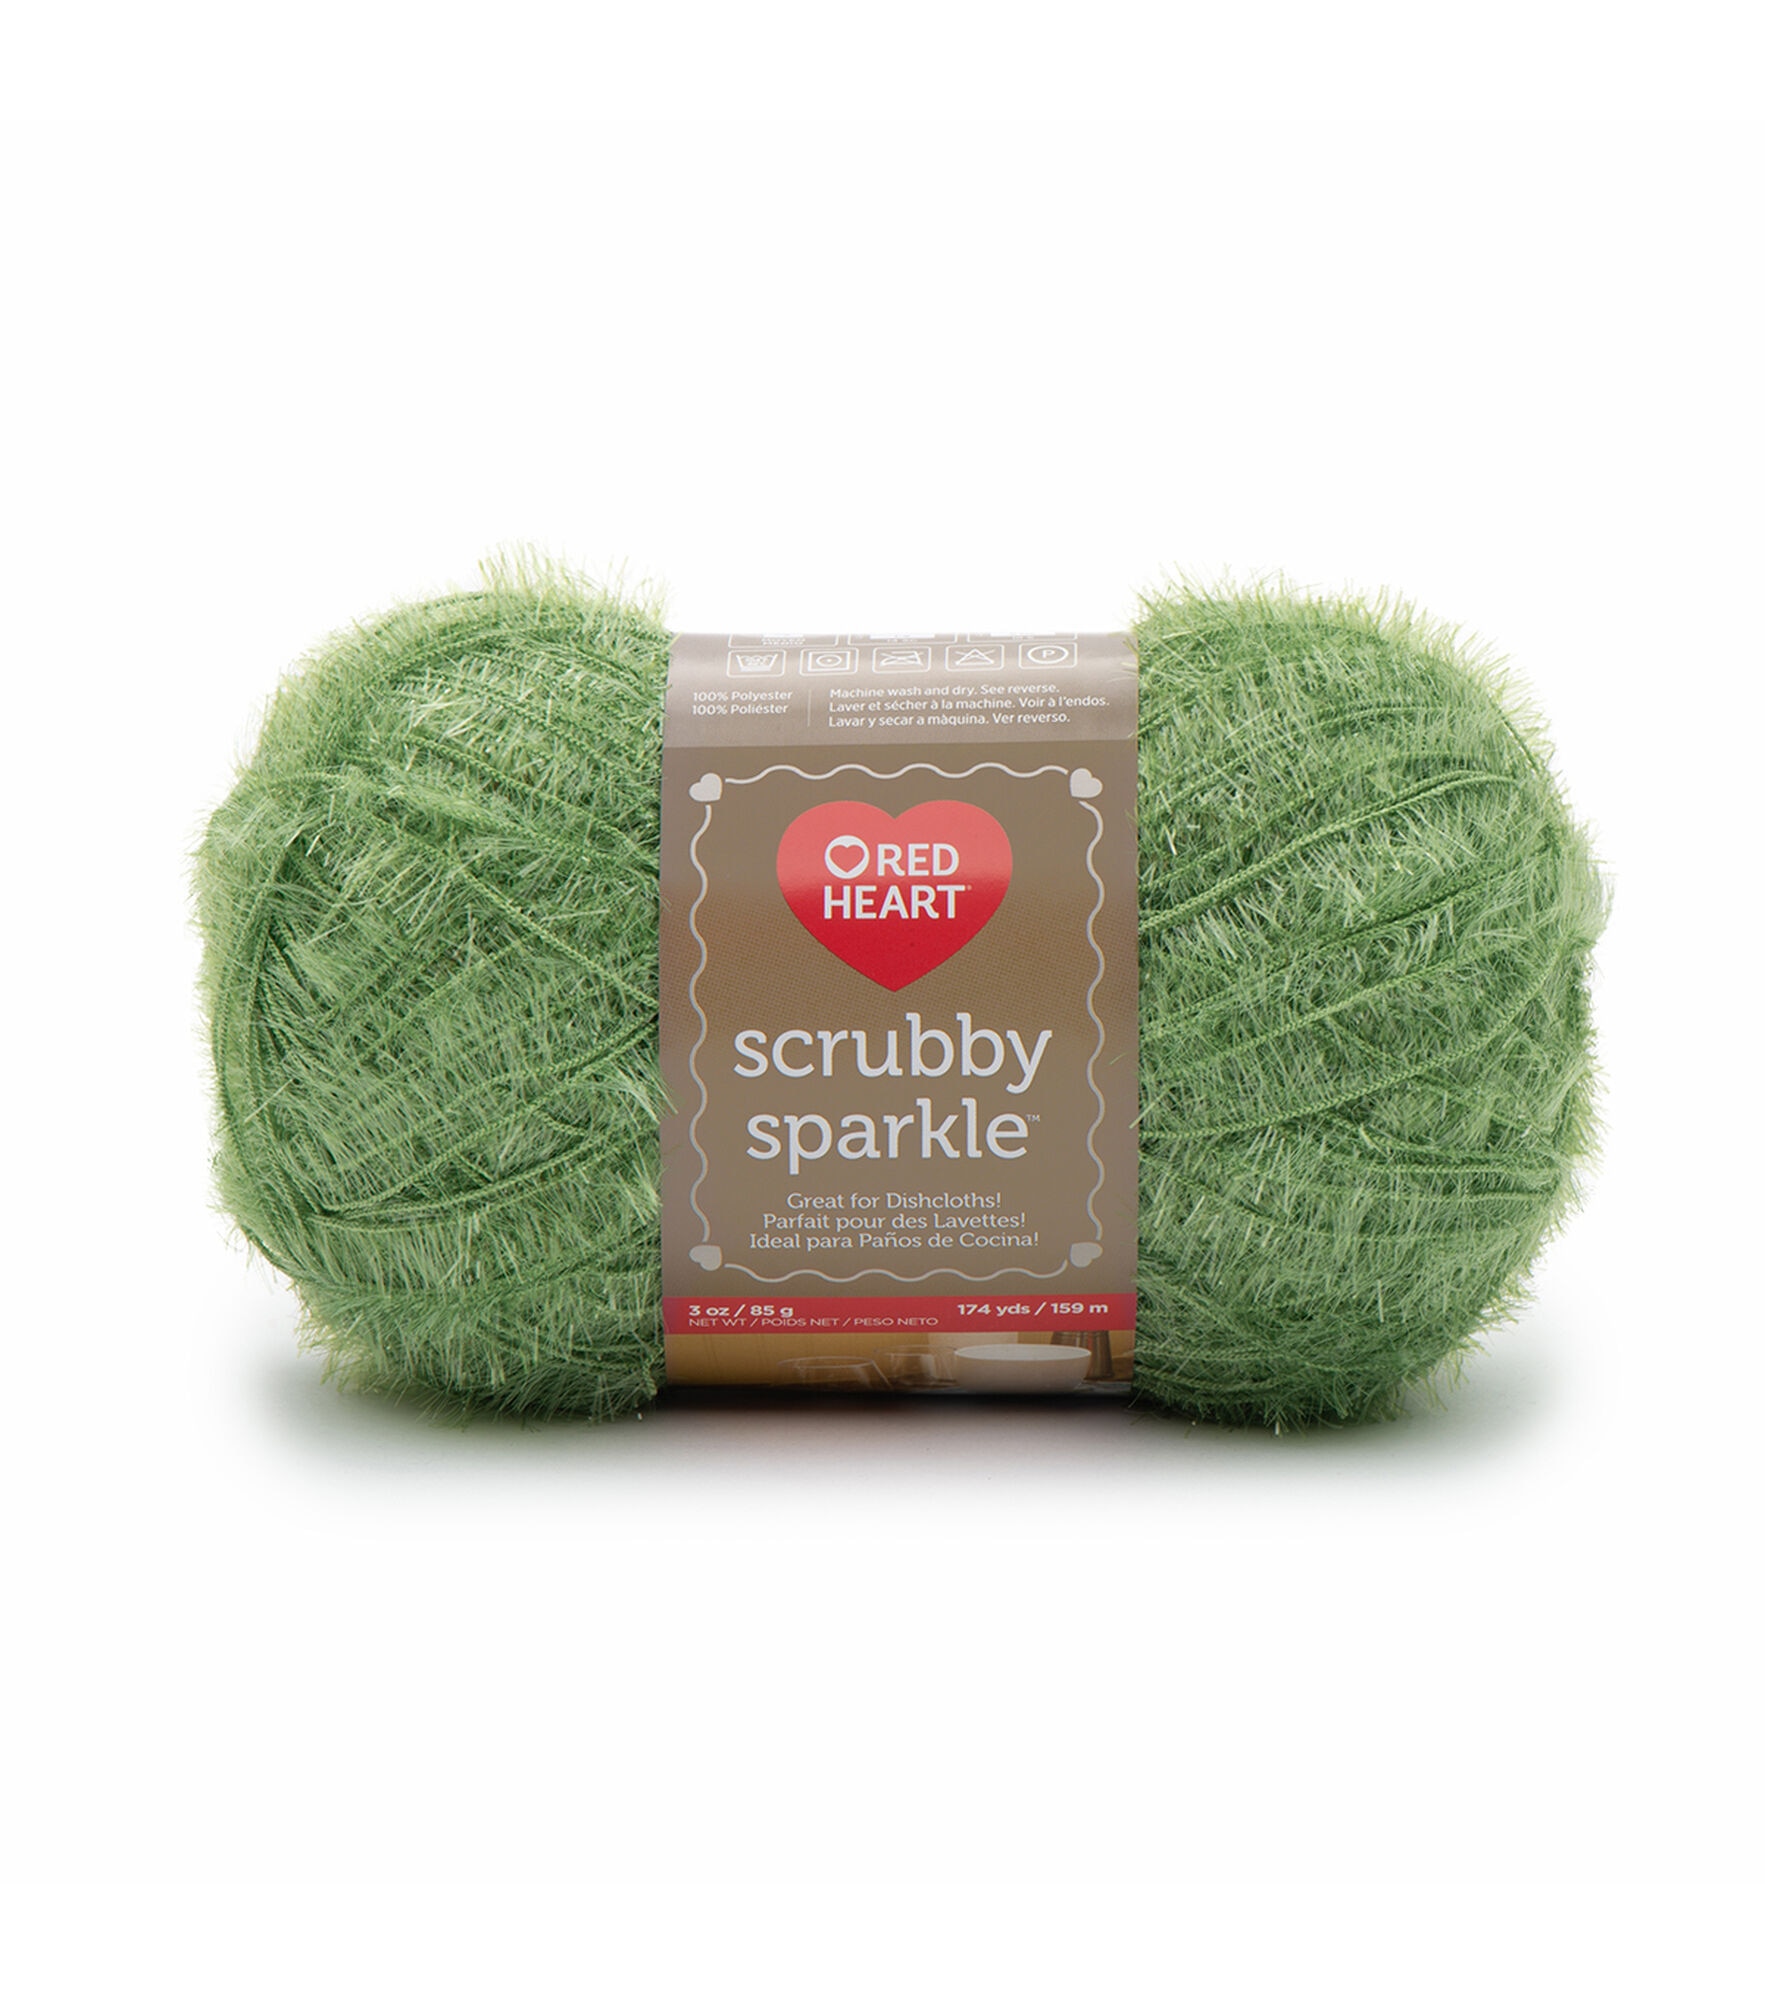 Red Heart Scrubby Sparkle 174yds Worsted Polyester Yarn, Avocado, hi-res